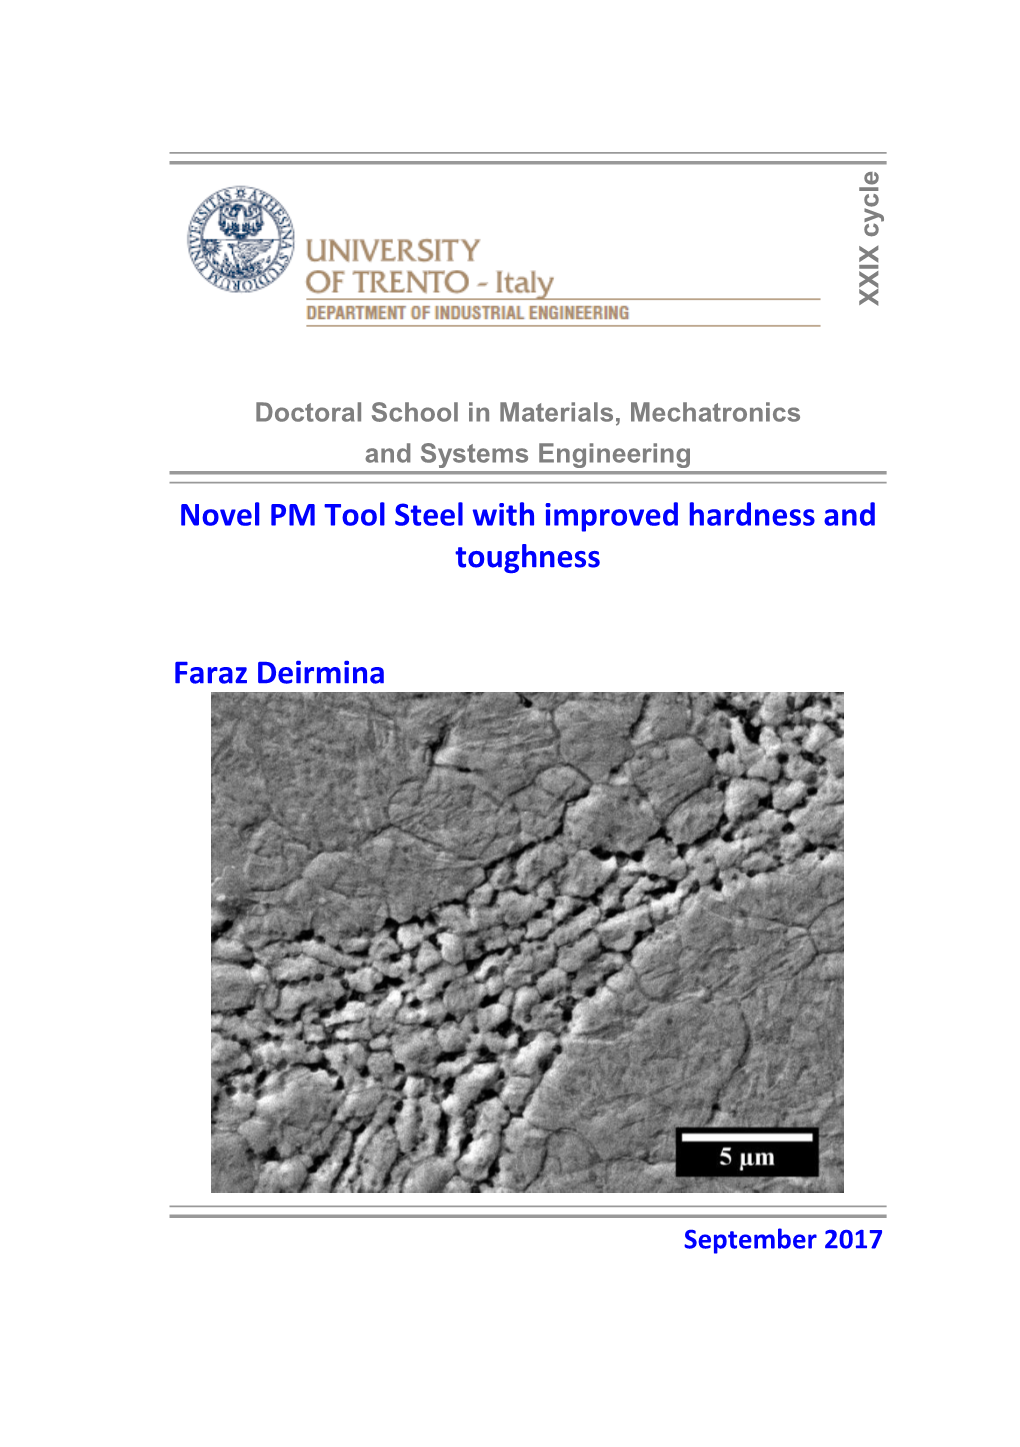 Novel PM Tool Steel with Improved Hardness and Toughness Faraz